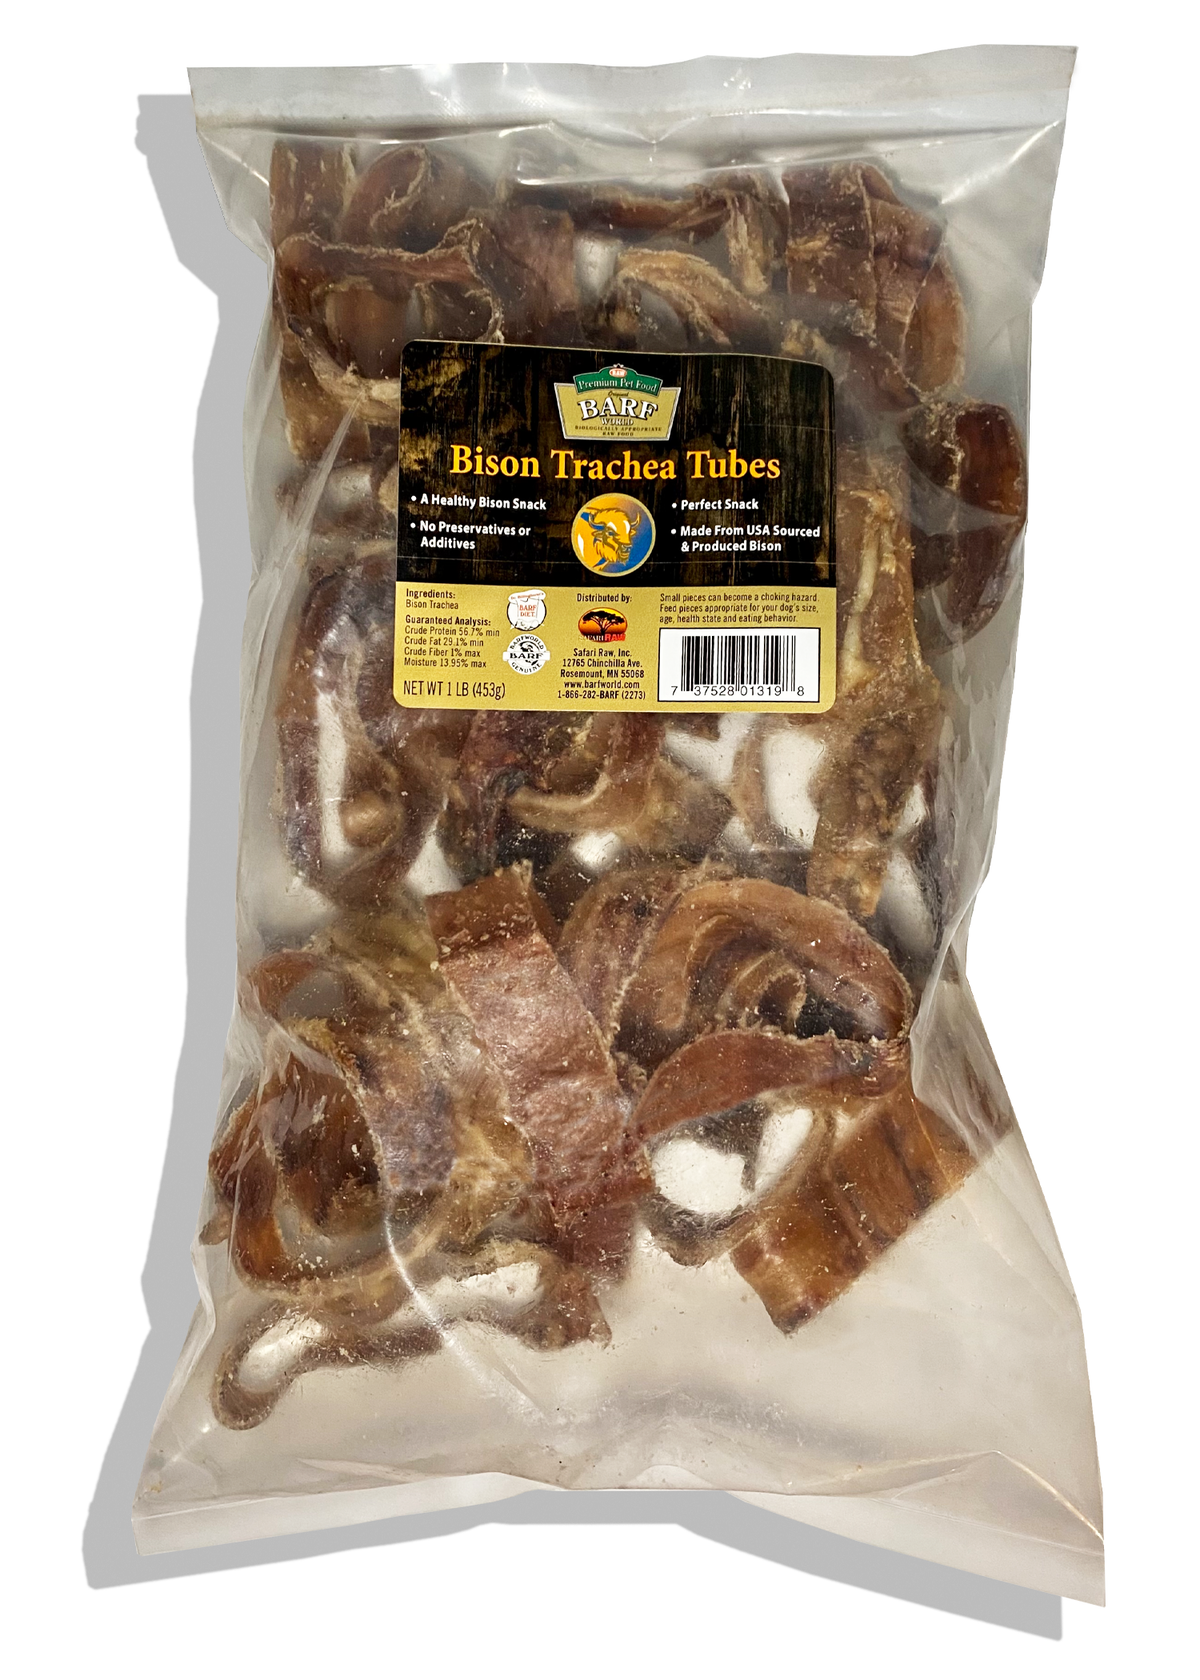 Bag of sliced bison trachea tubes from BARF World